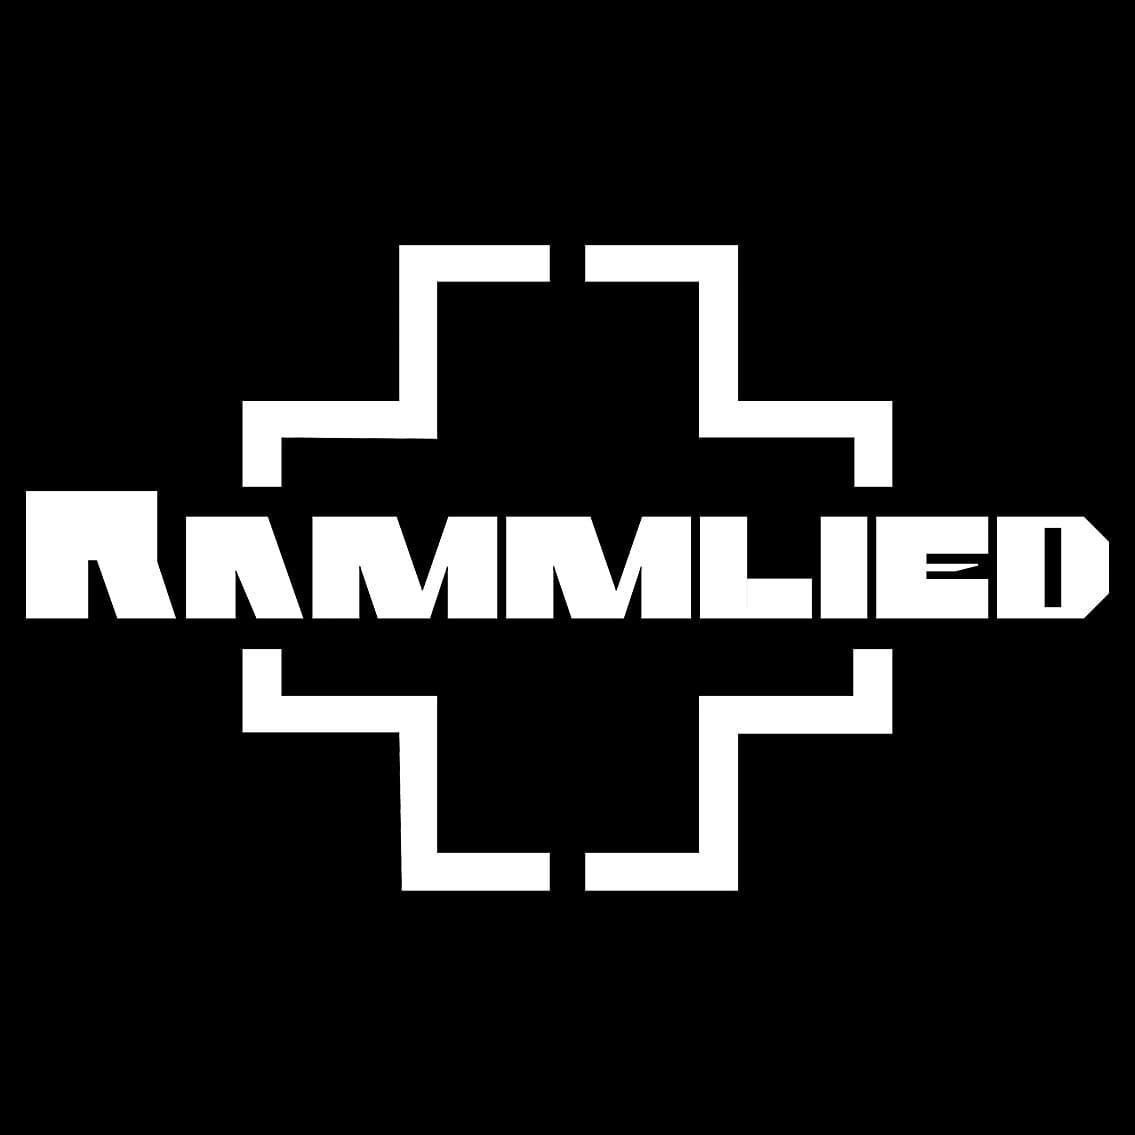 Rammlied at Arches Venue